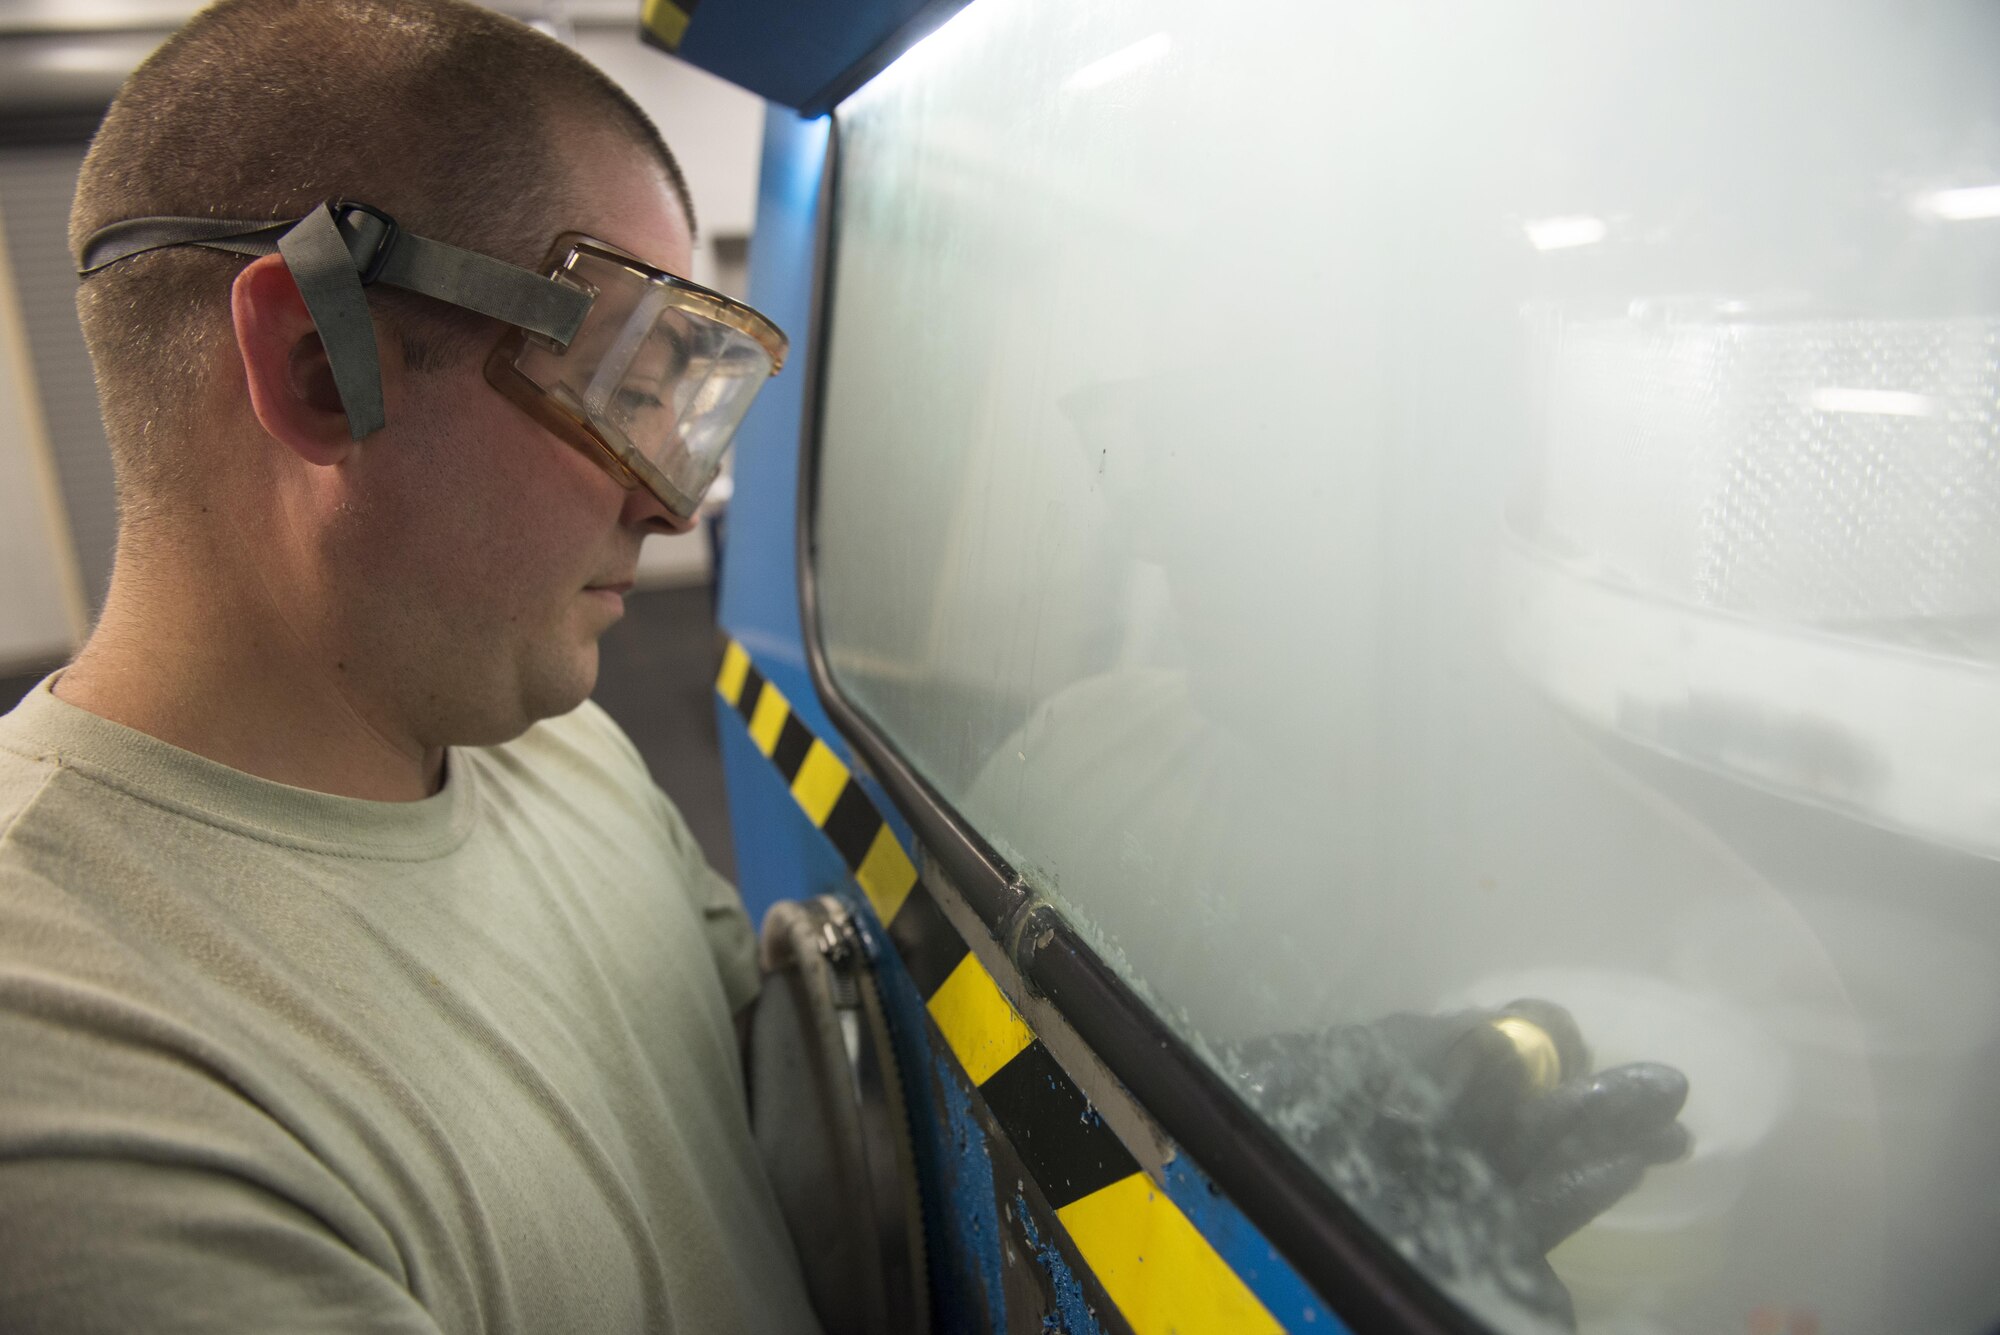 Staff Sgt. Mark Gower, 33rd Maintenance Squadron wheel and tire technician, washes F-35 wheel parts in a parts washer June 9, 2016, at Eglin Air Force Base, Fla. Members of the 33rd MXS Wheel and Tire Shop use the parts washer to clean break dust and old grease off of wheel assemblies to prepare them for a new tire and wheel bearing, ensuring proper tire function. (U.S. Air Force photo by Senior Airman Stormy Archer/Released)